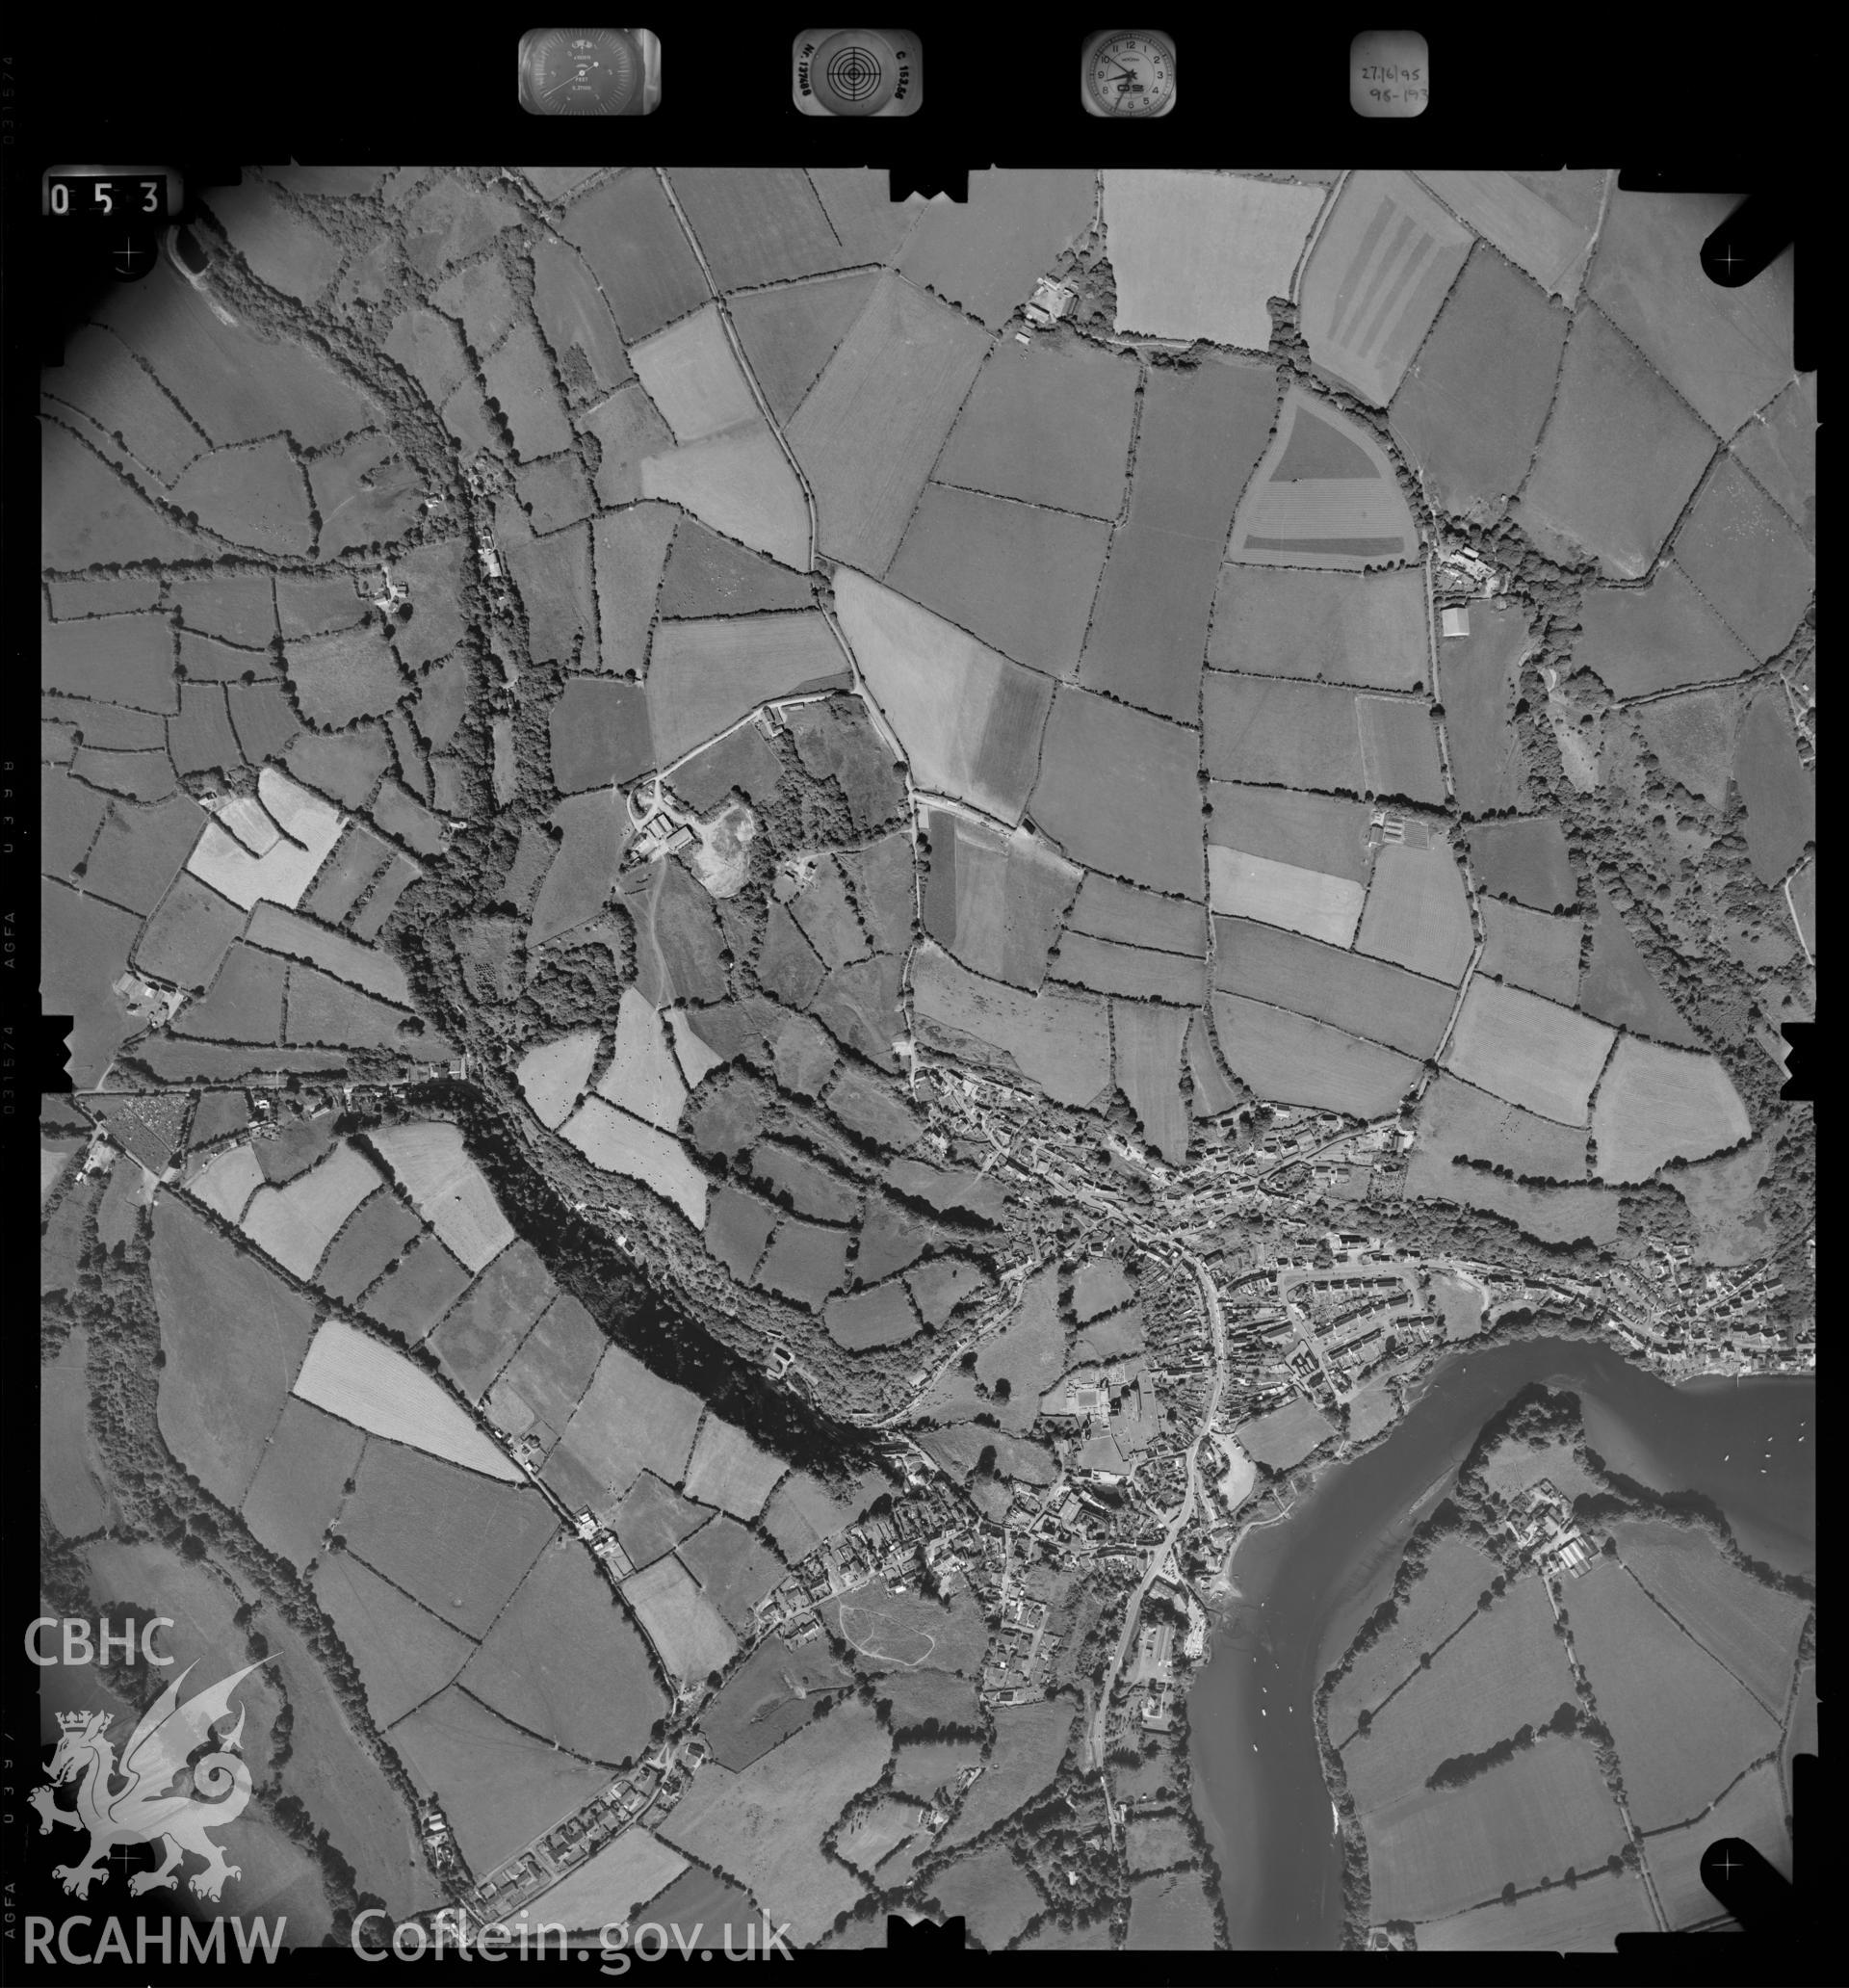 Digital copy of an Ordnance Survey aerial view of St. Dogmaels dated 1995.